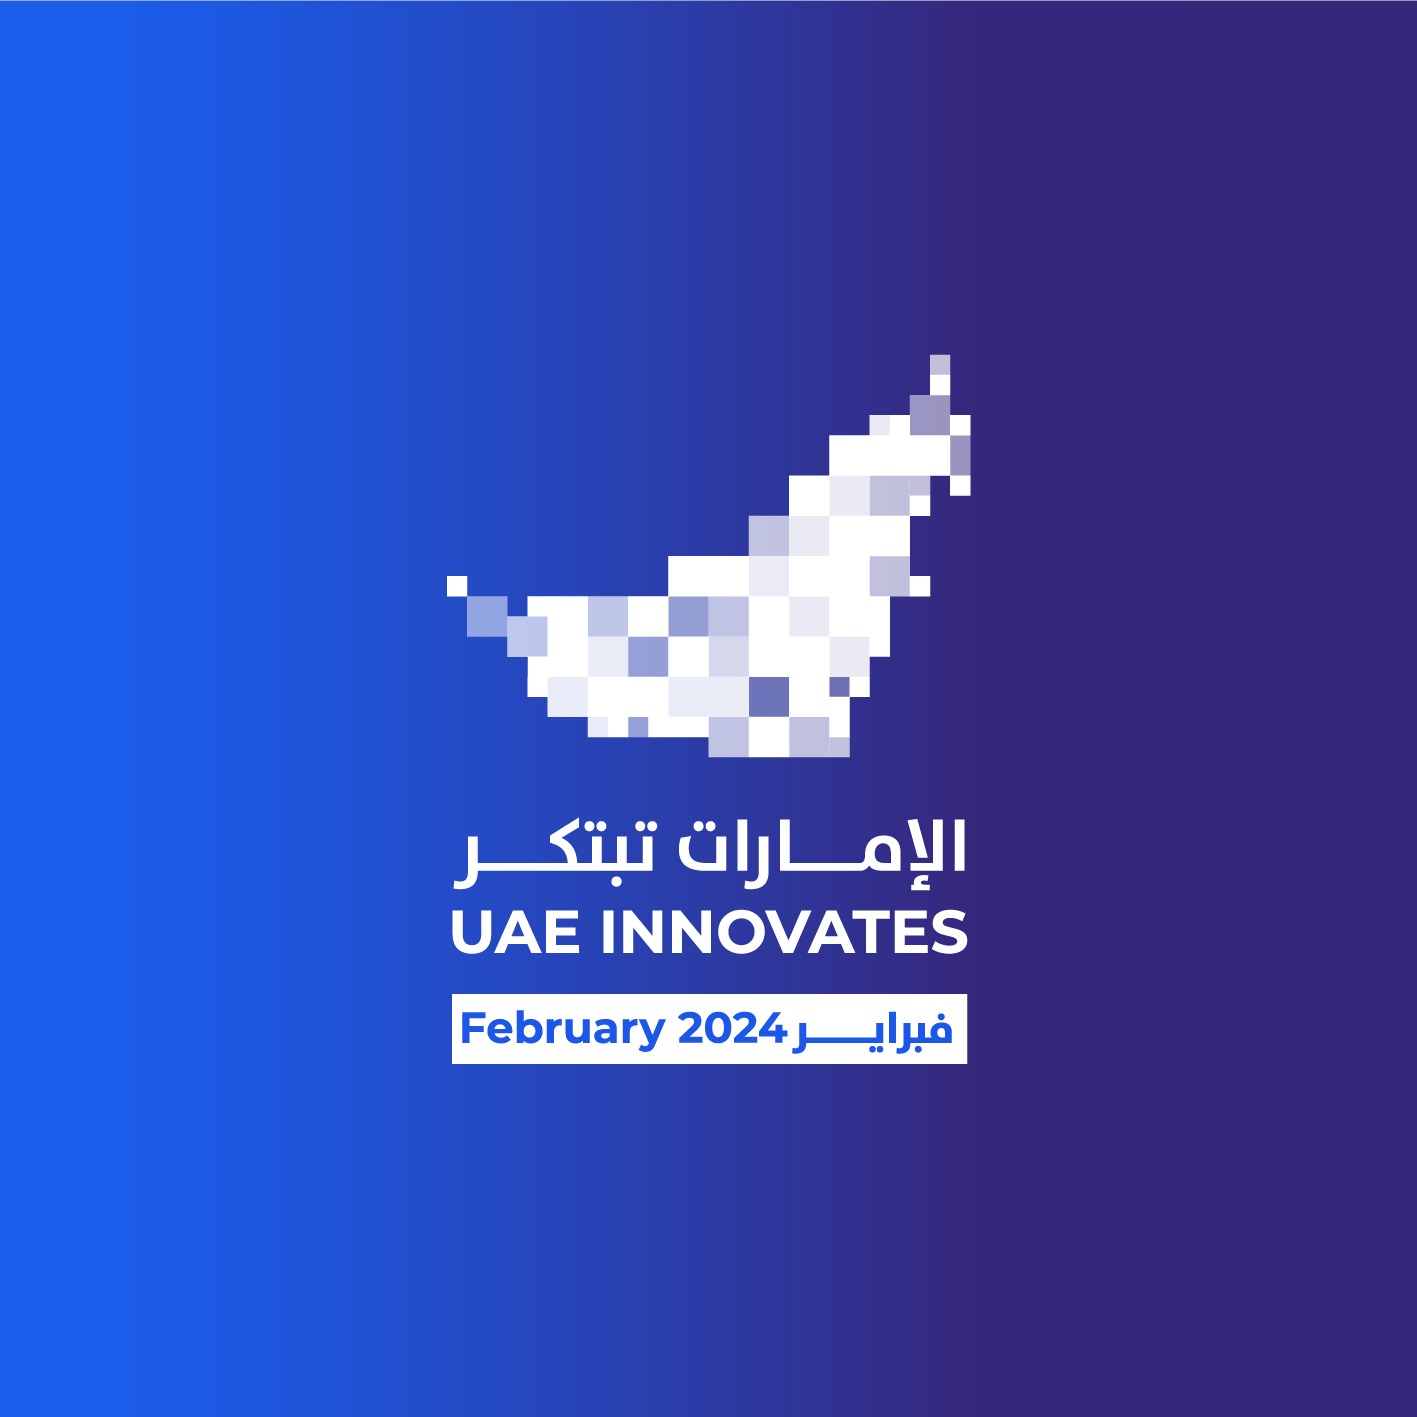 MOI's activities in UAE Innovates 2024